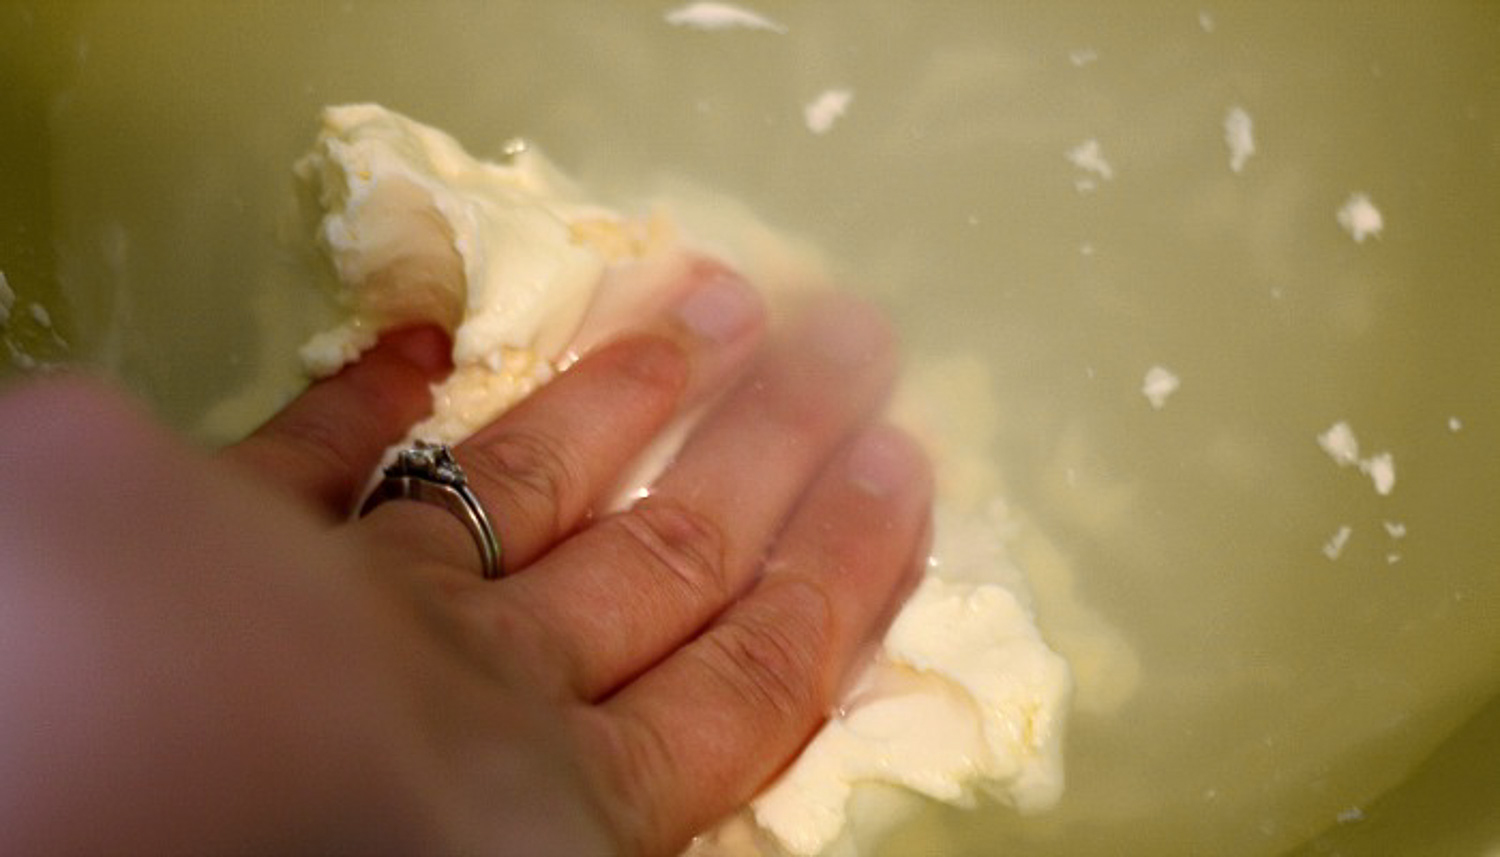 A hand with a ring pushing and washing the butter in water.